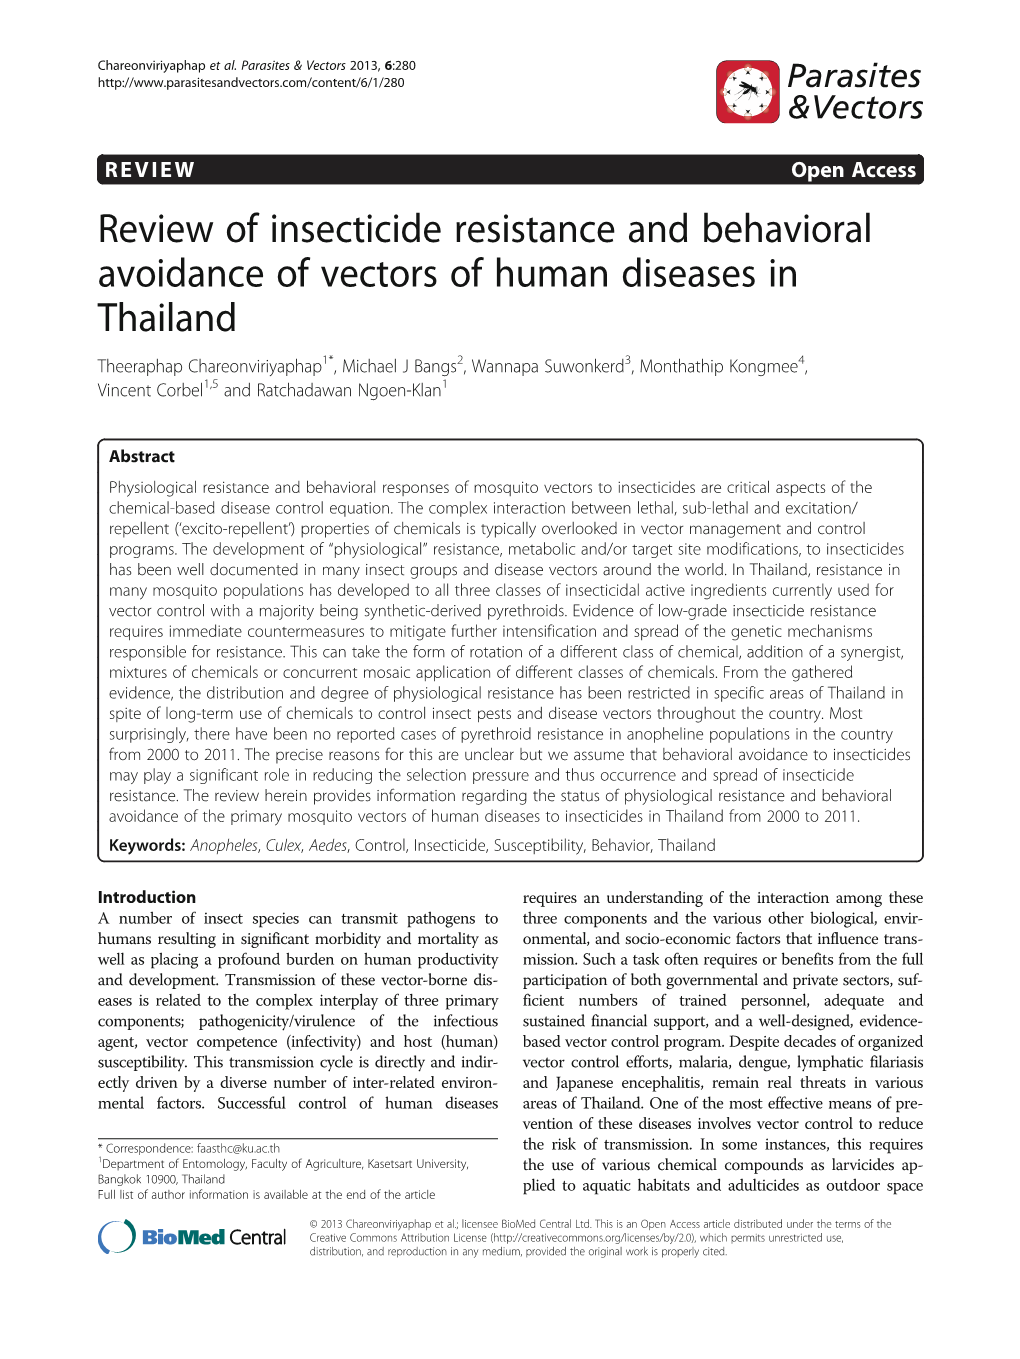 Review of Insecticide Resistance and Behavioral Avoidance of Vectors Of